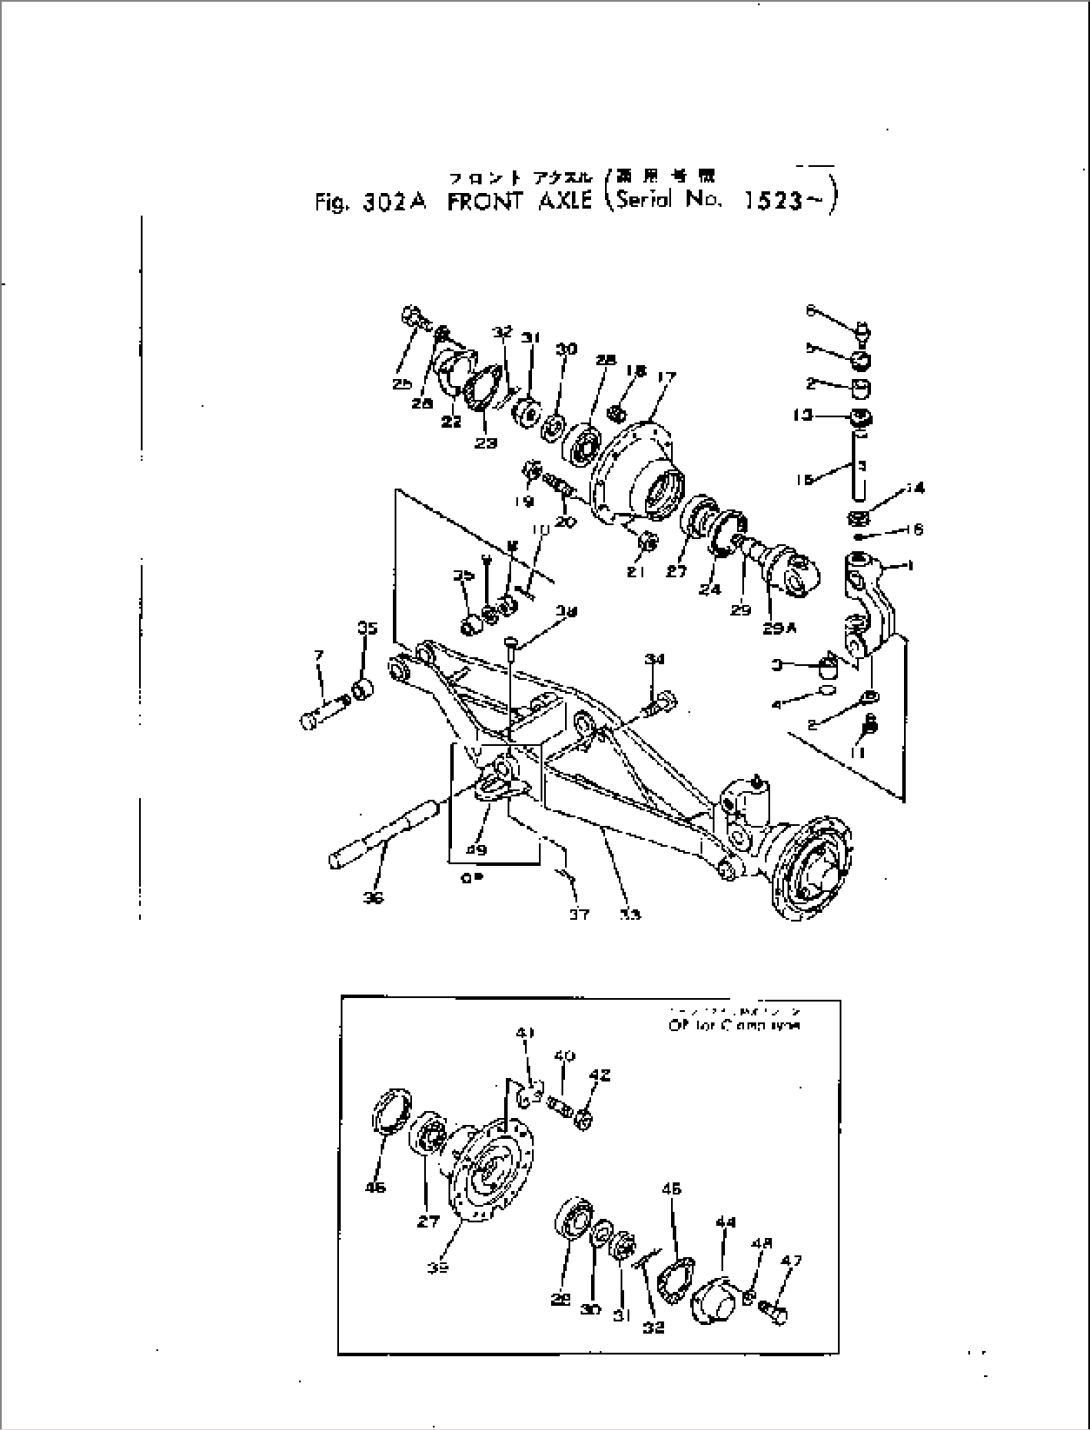 FRONT AXLE(#1523-)